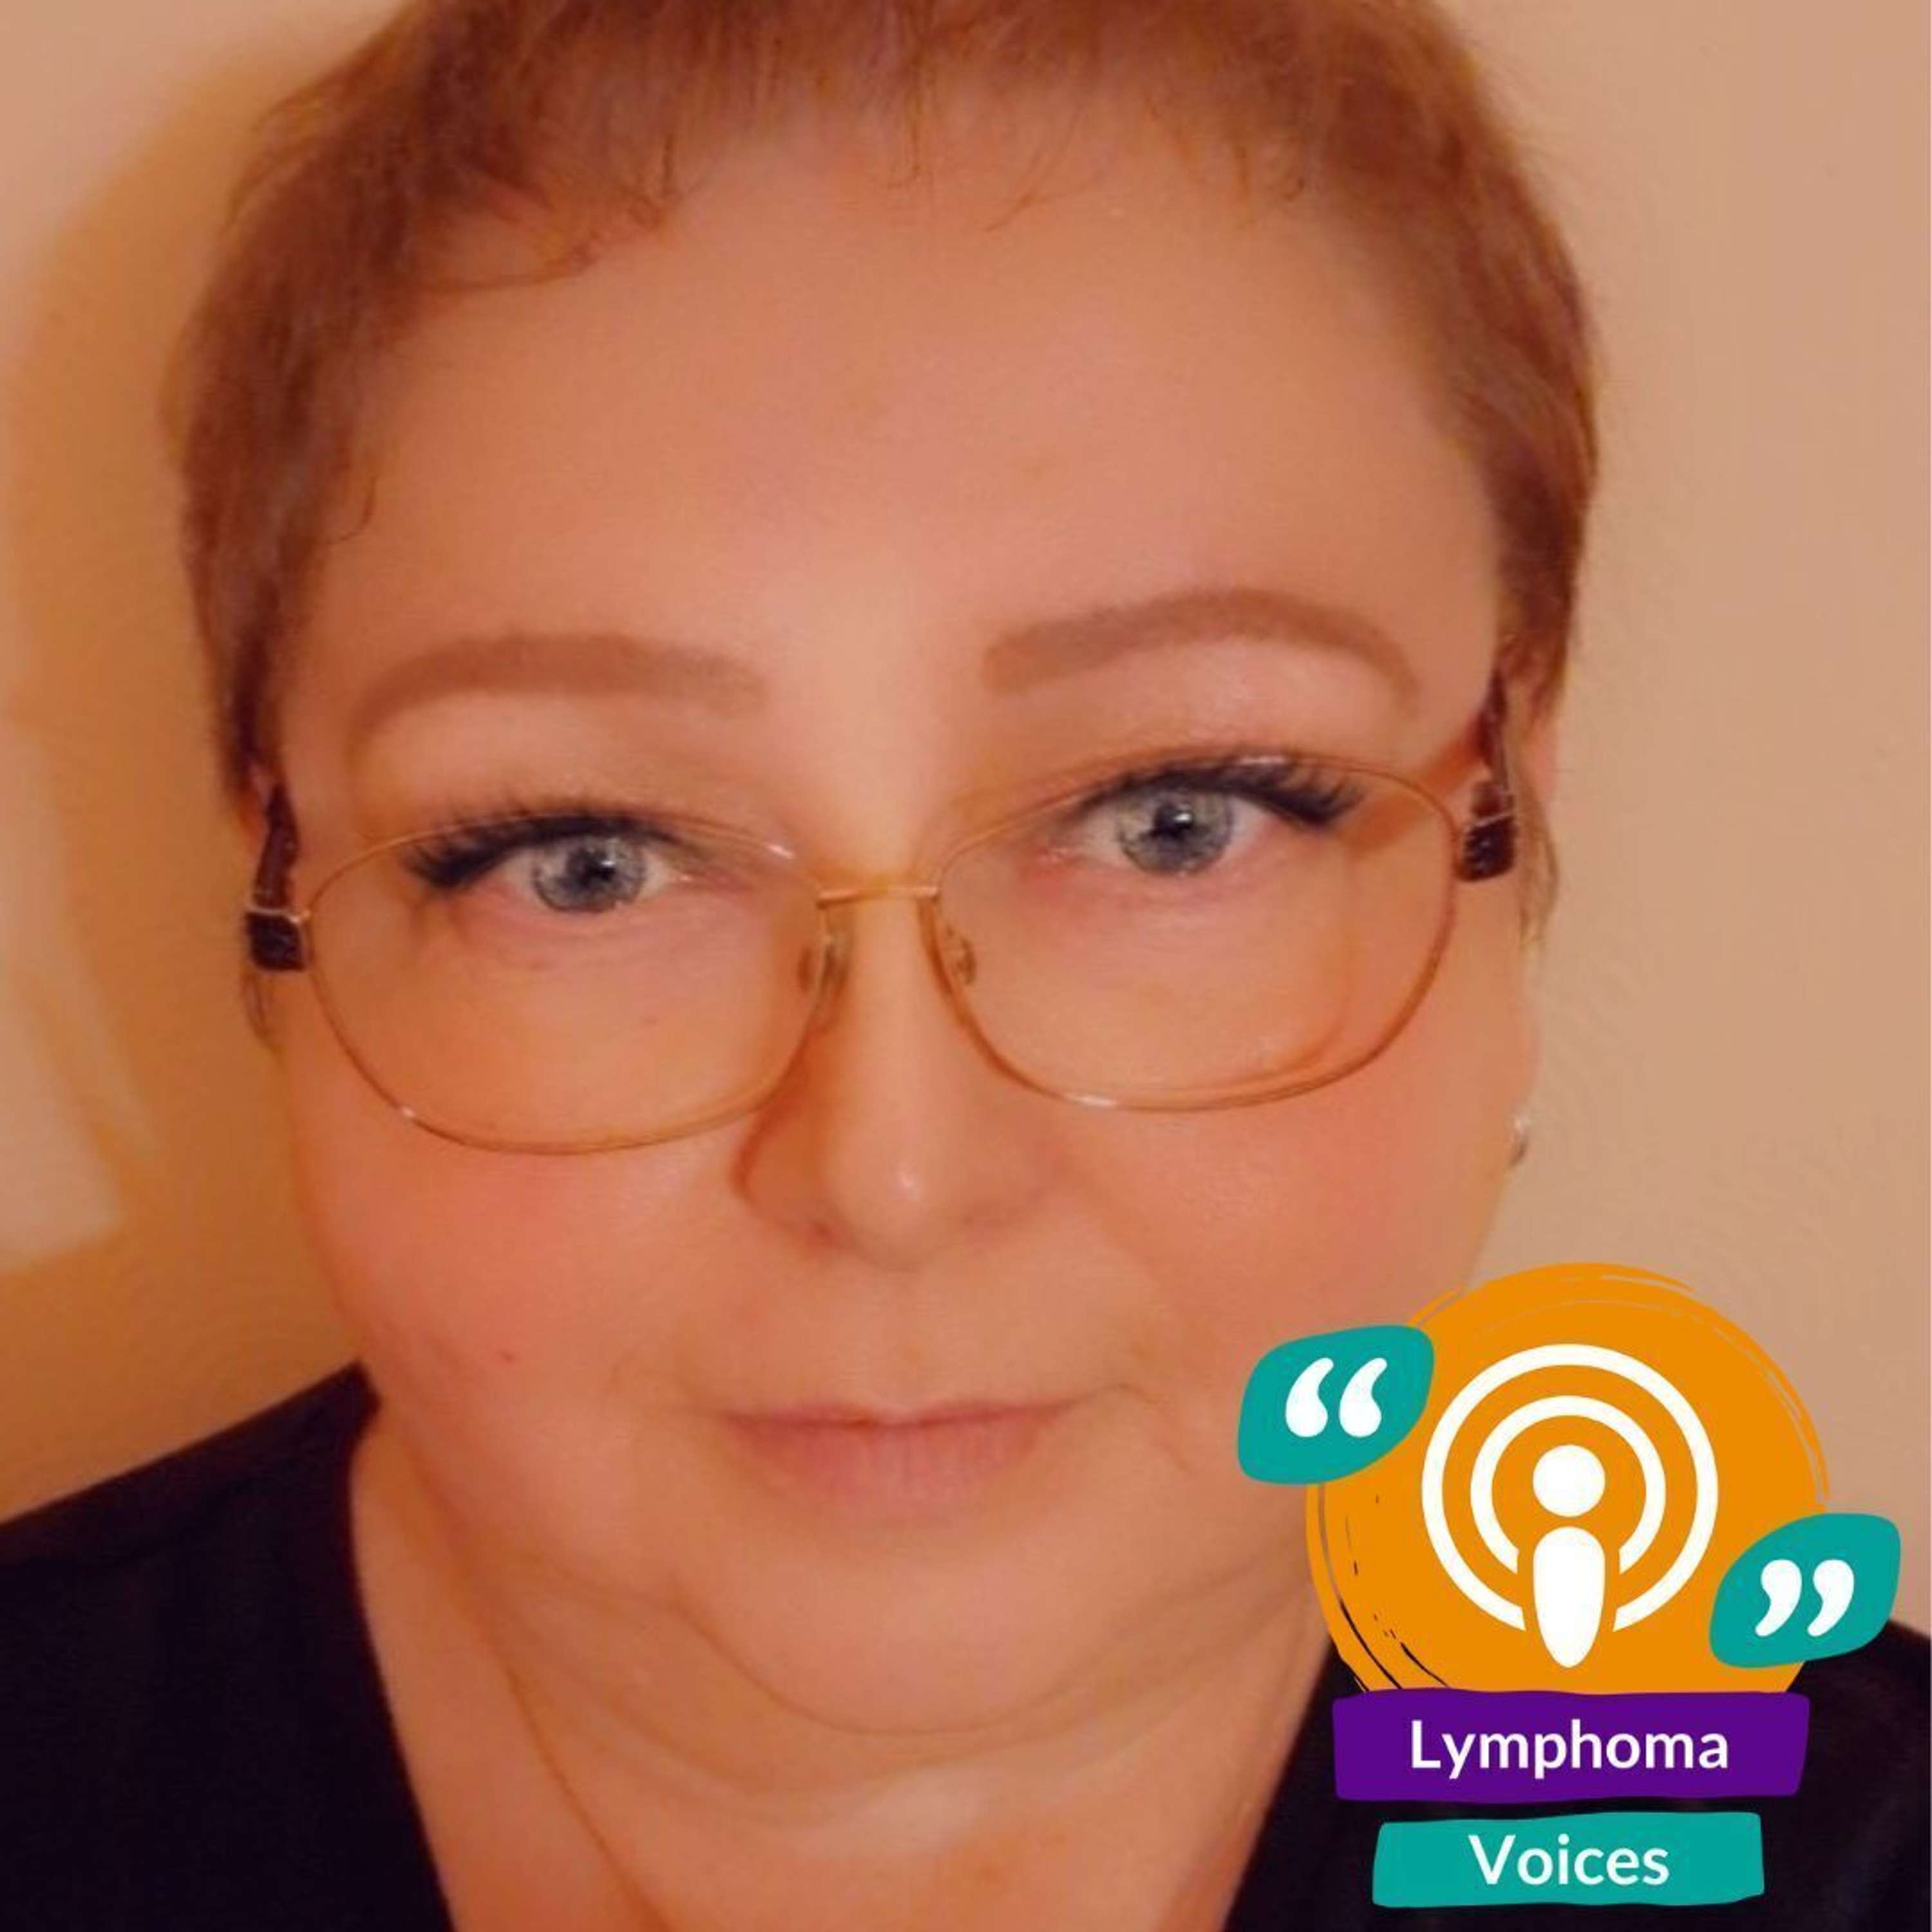 With a low-grade lymphoma, I feel like I’m living on countdown